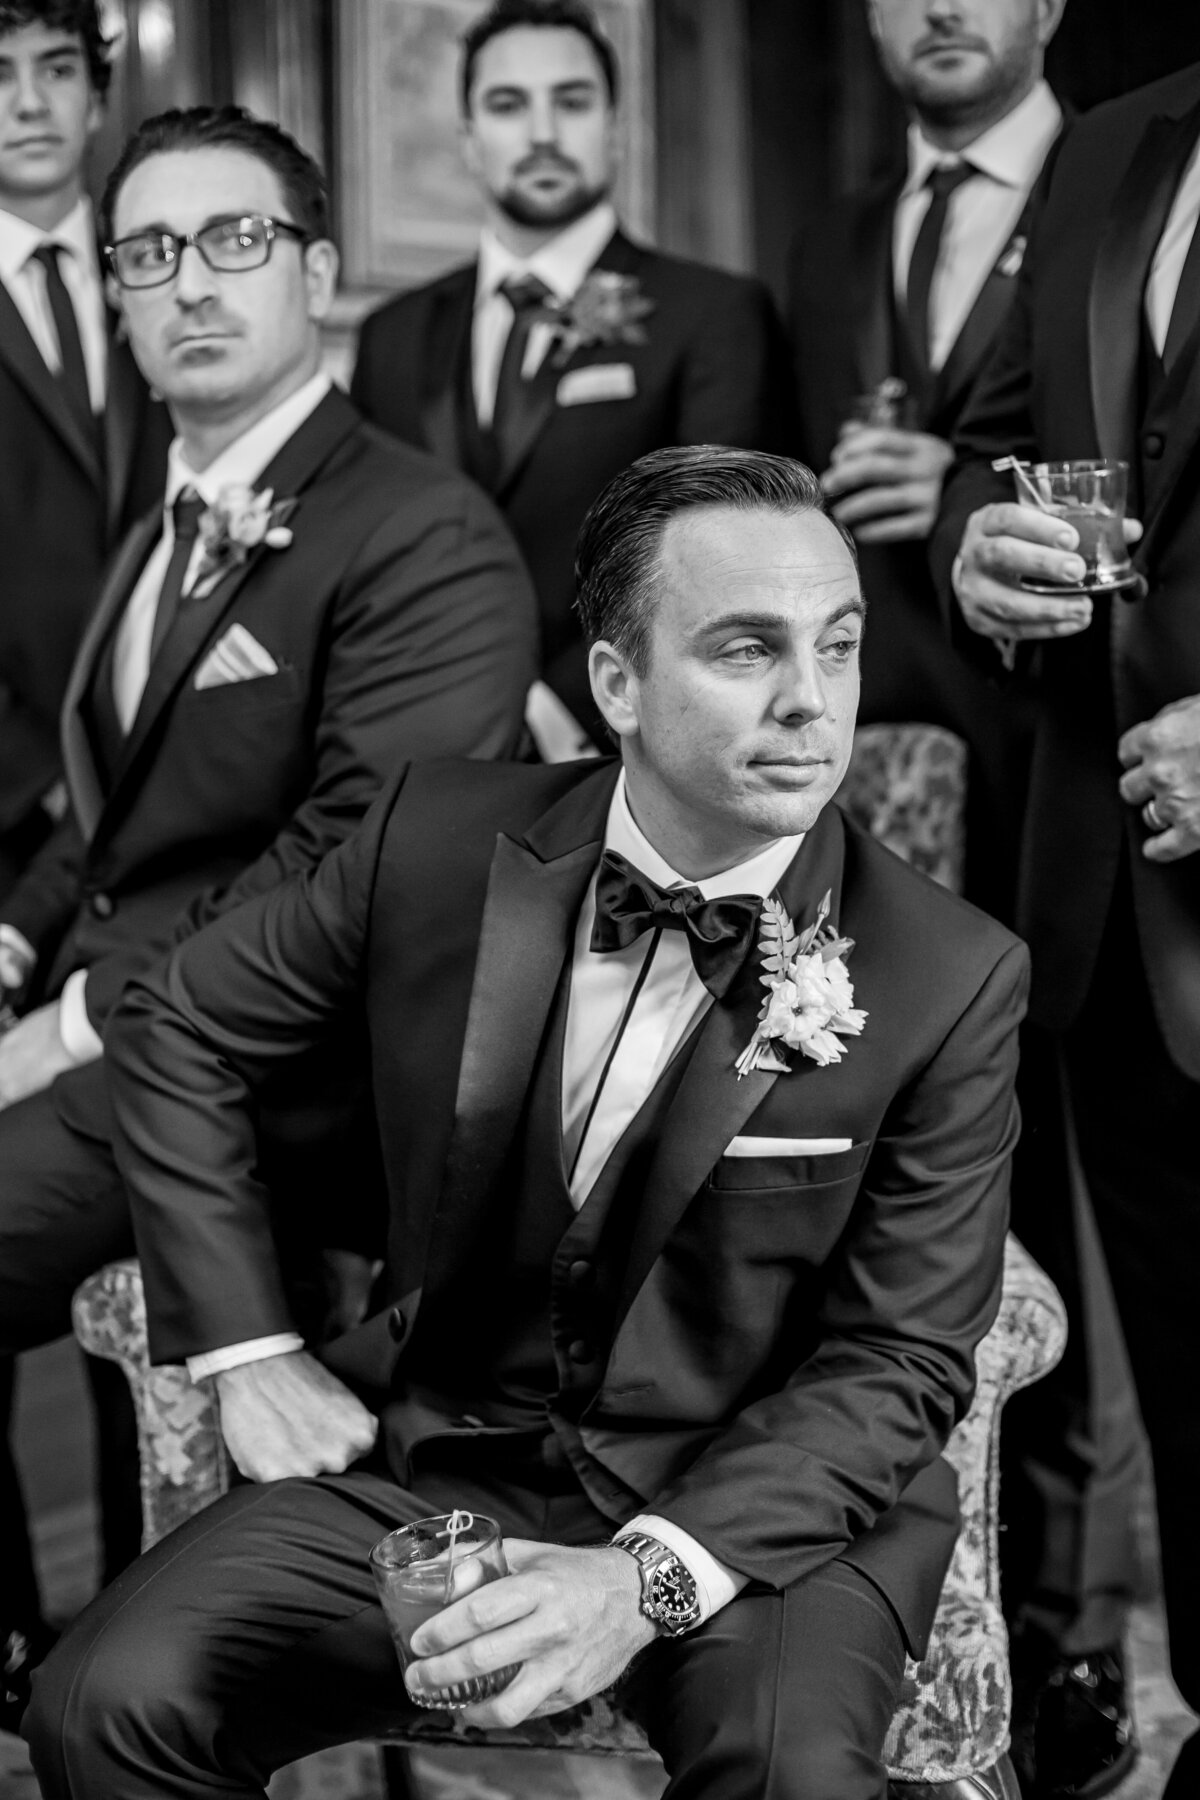 black and white photo of handsome groom with his groomsmen and a beverage